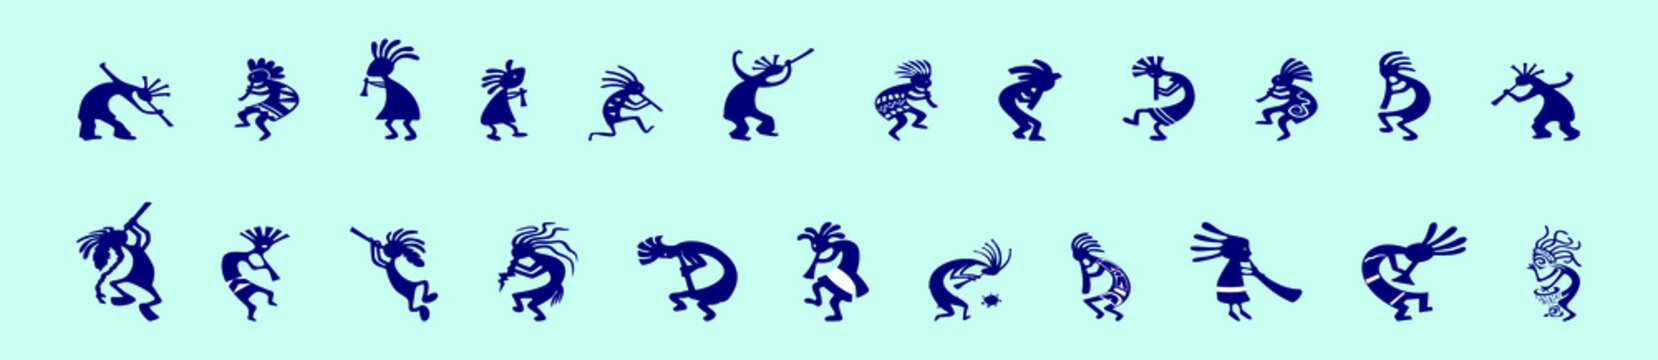 set of kokopeli or mythical flute player icon design template with various models. vector illustration